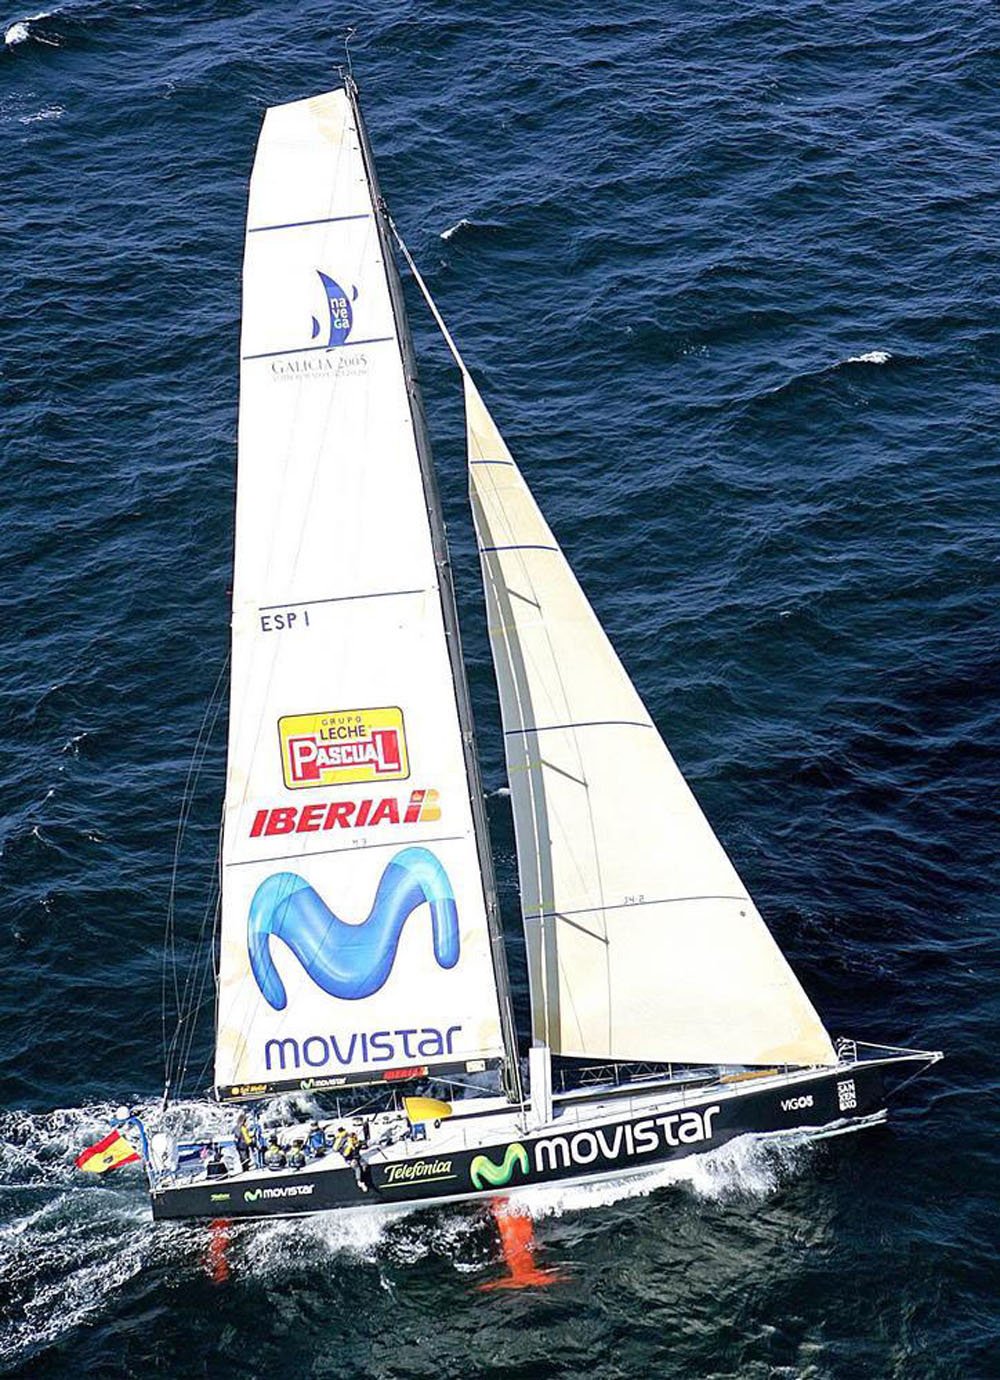 TELEFÓNICA MOVISTAR'S SUPPORT IN DIFFERENT SAILING DISCIPLINES HAS BEEN CONSTANT